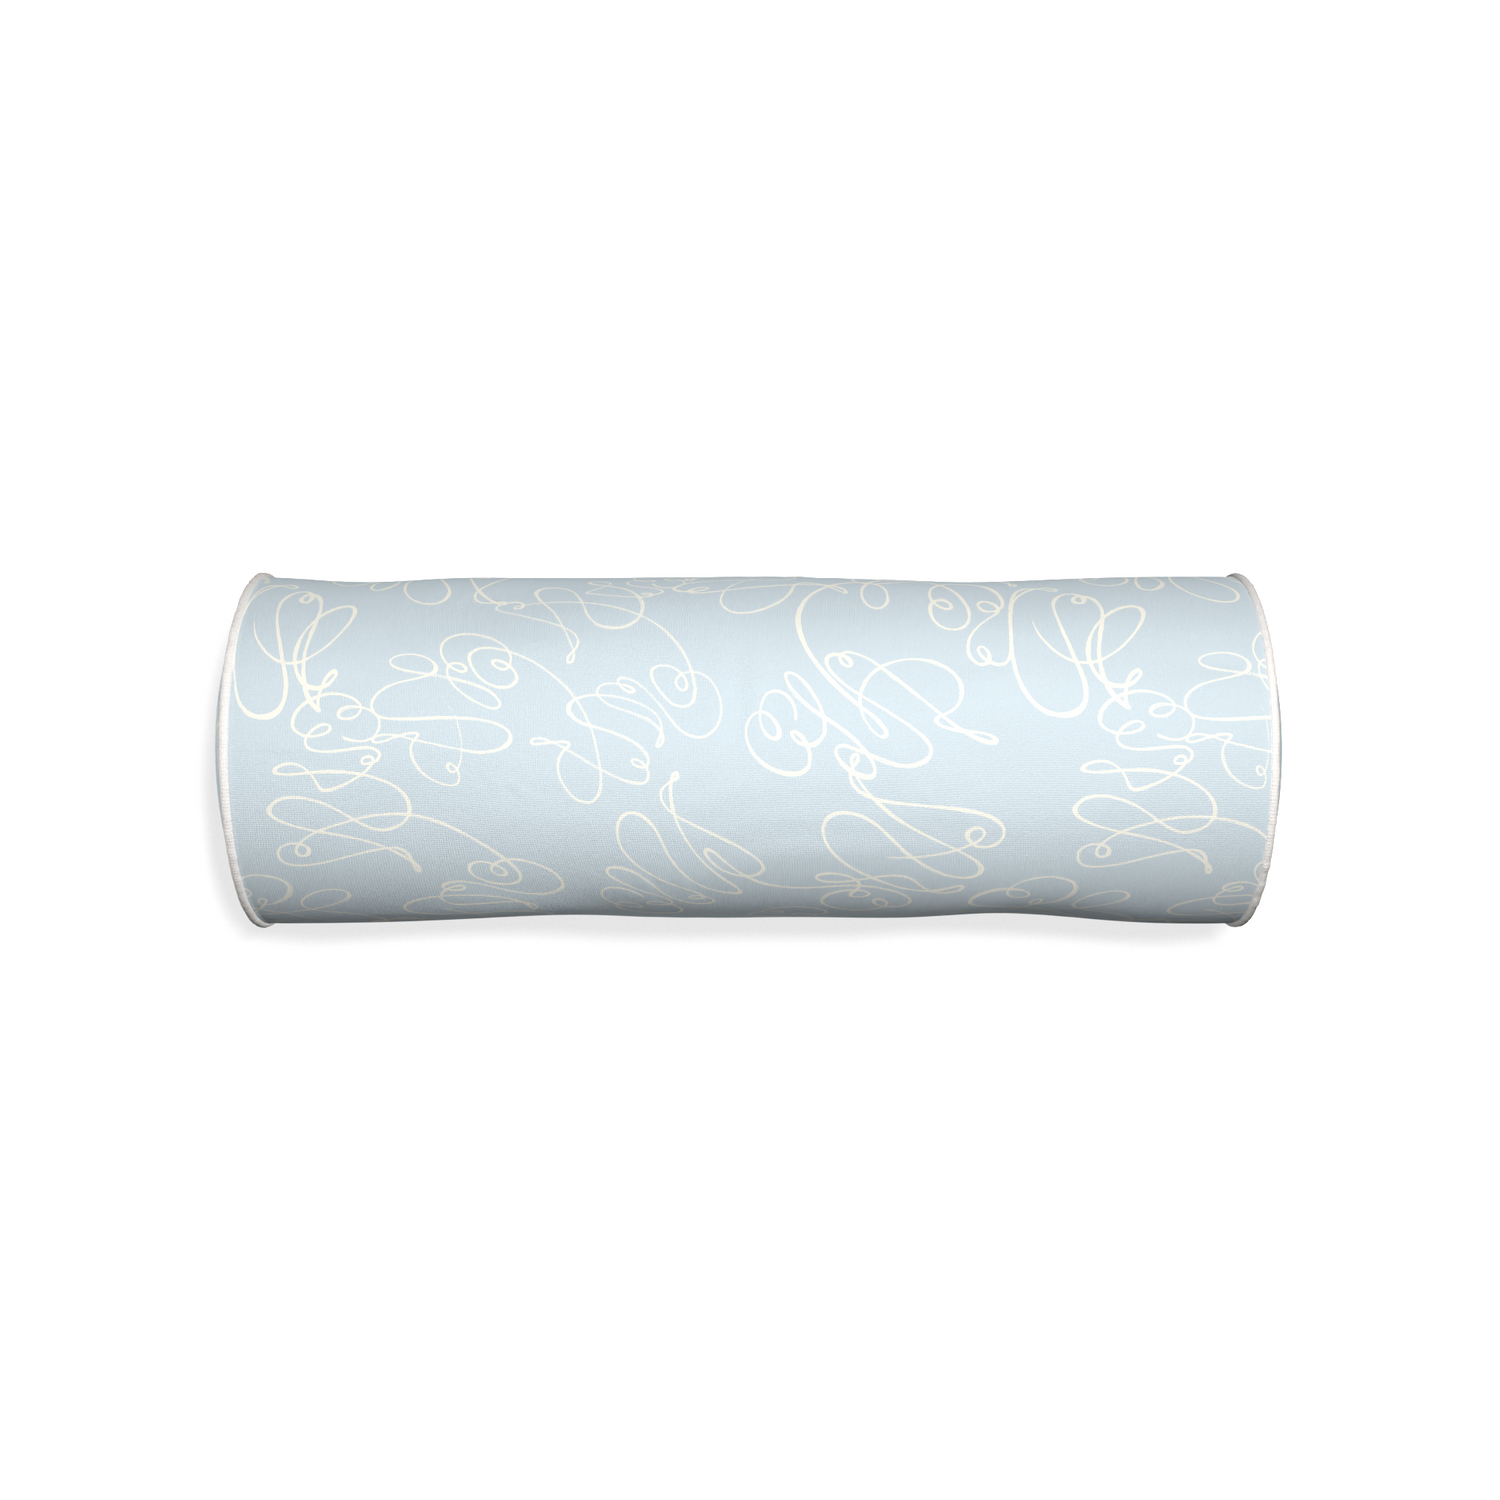 Bolster mirabella custom powder blue abstractpillow with snow piping on white background